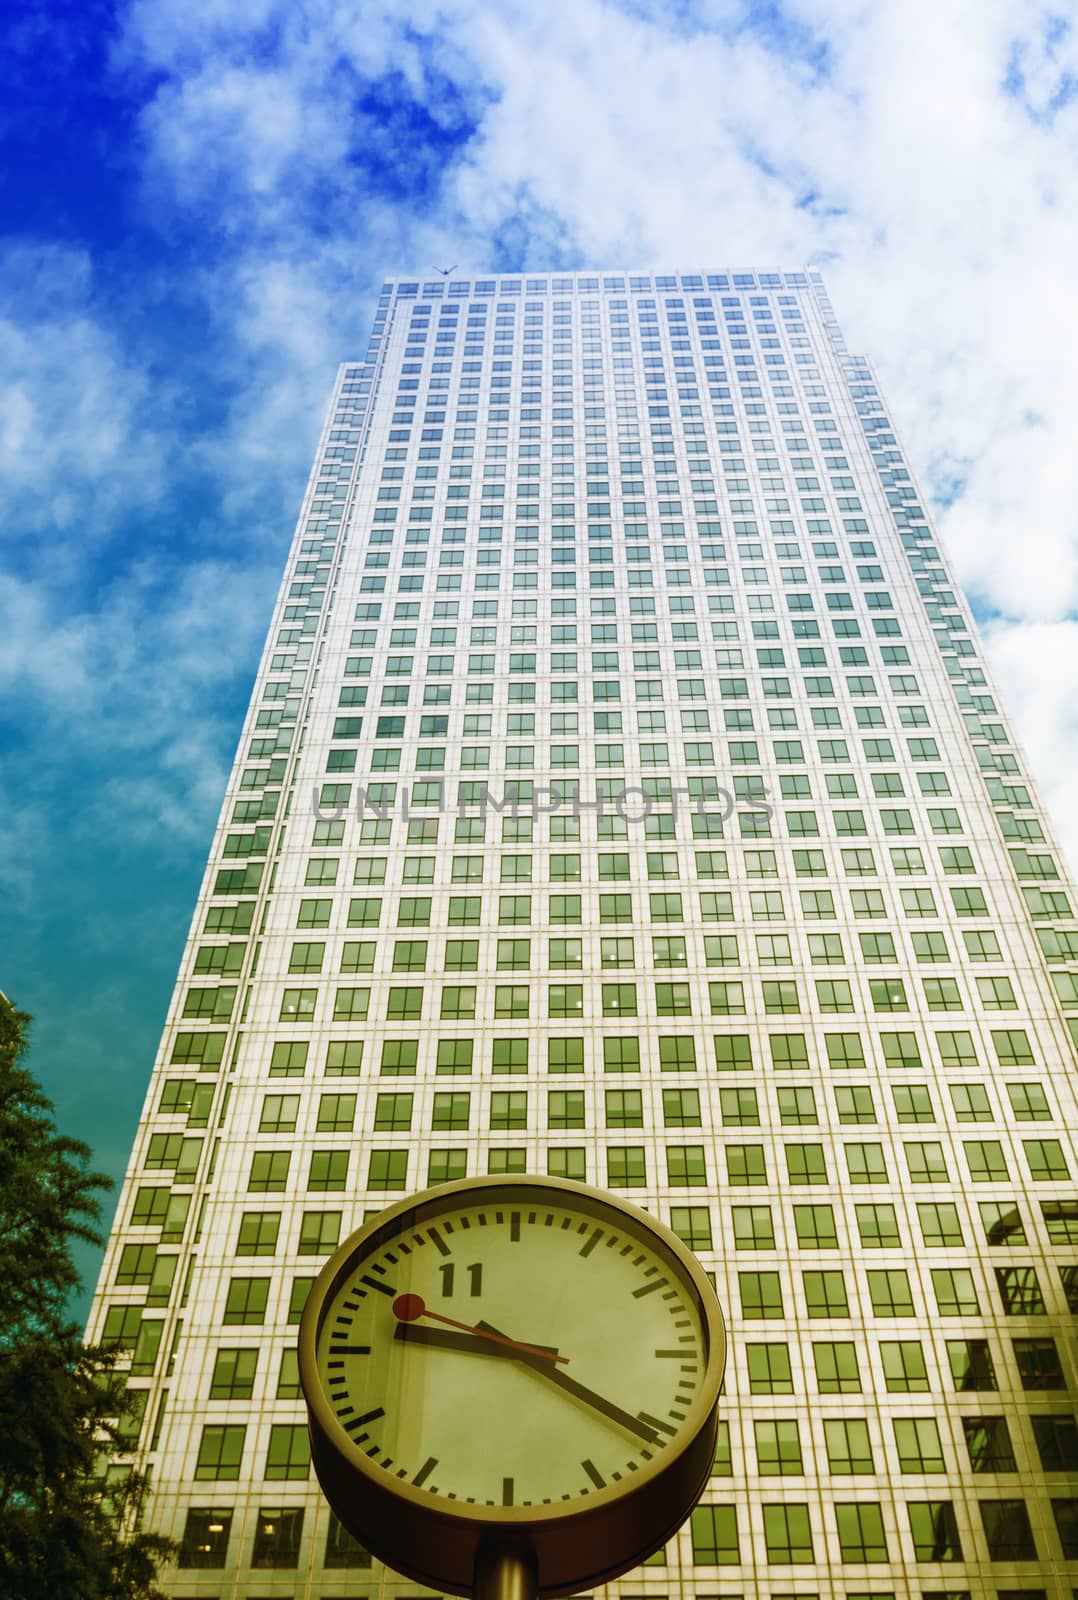 Clock and Skyscrapers at Canary Wharf, financial district in Lon by jovannig